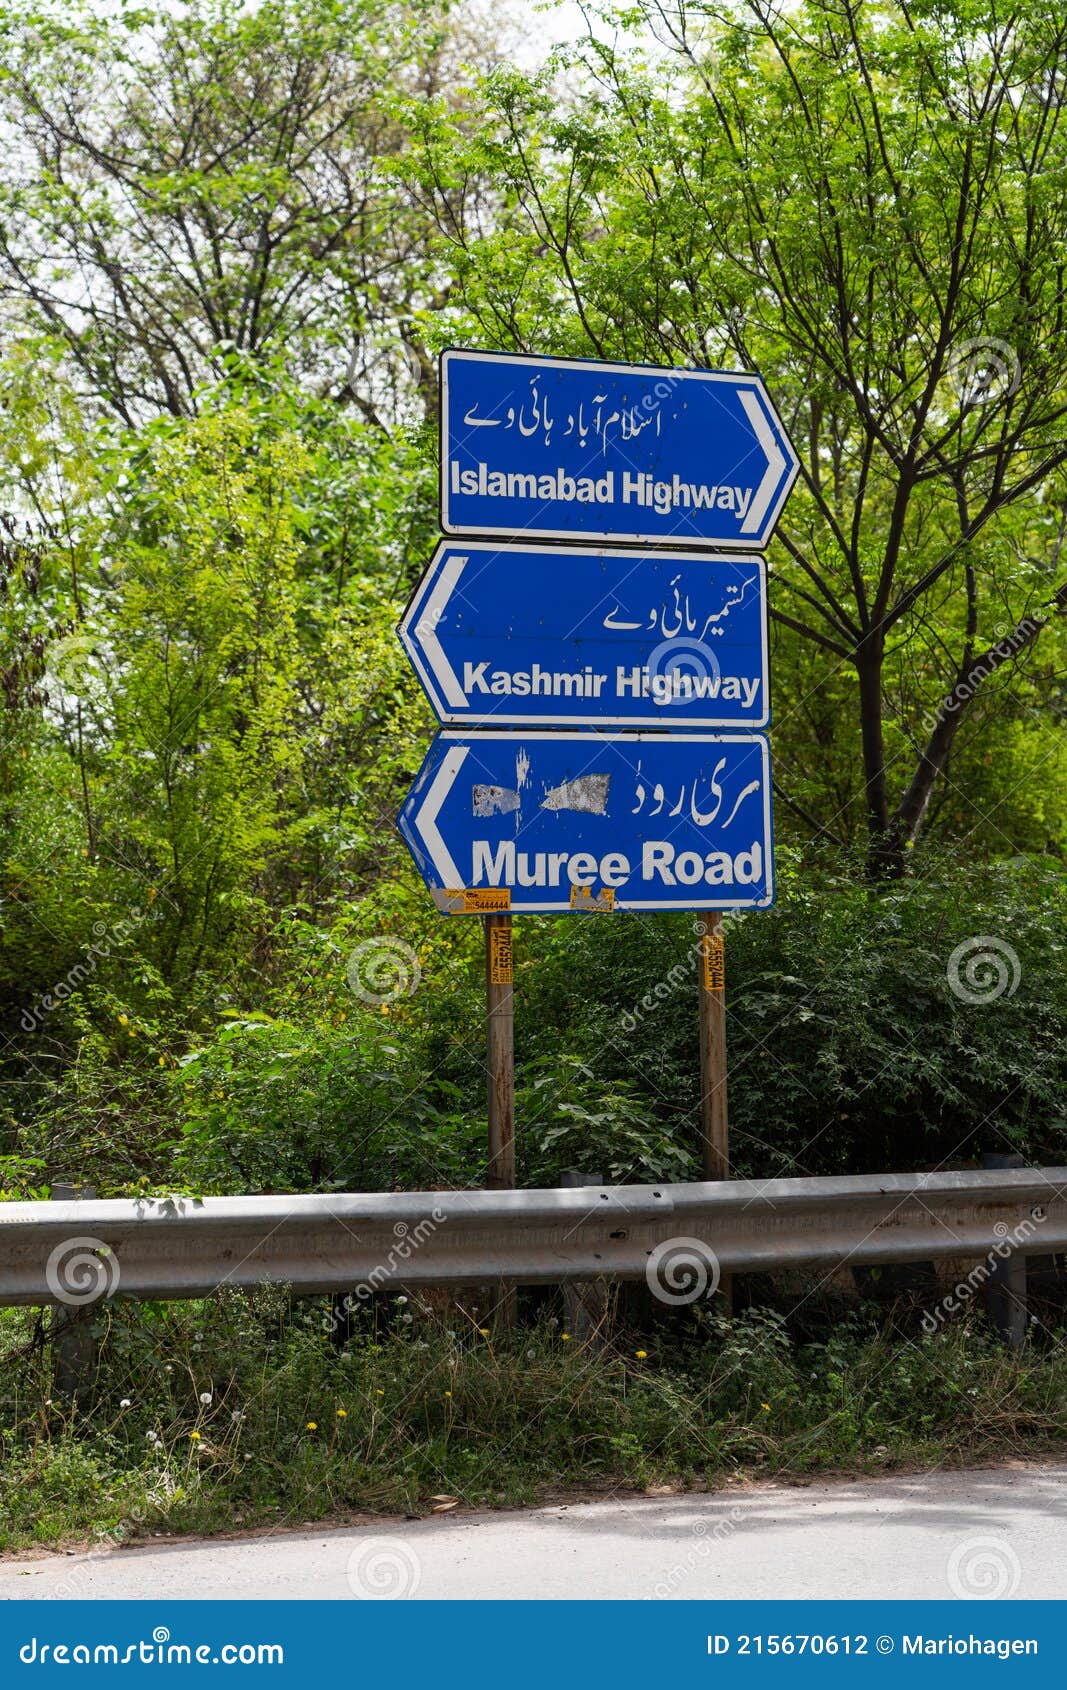 Islamabad City Xxx Video - Islamabad City, Traffic Sign To Islamabad Highway and Kashmir Highway Stock  Photo - Image of asia, board: 215670612